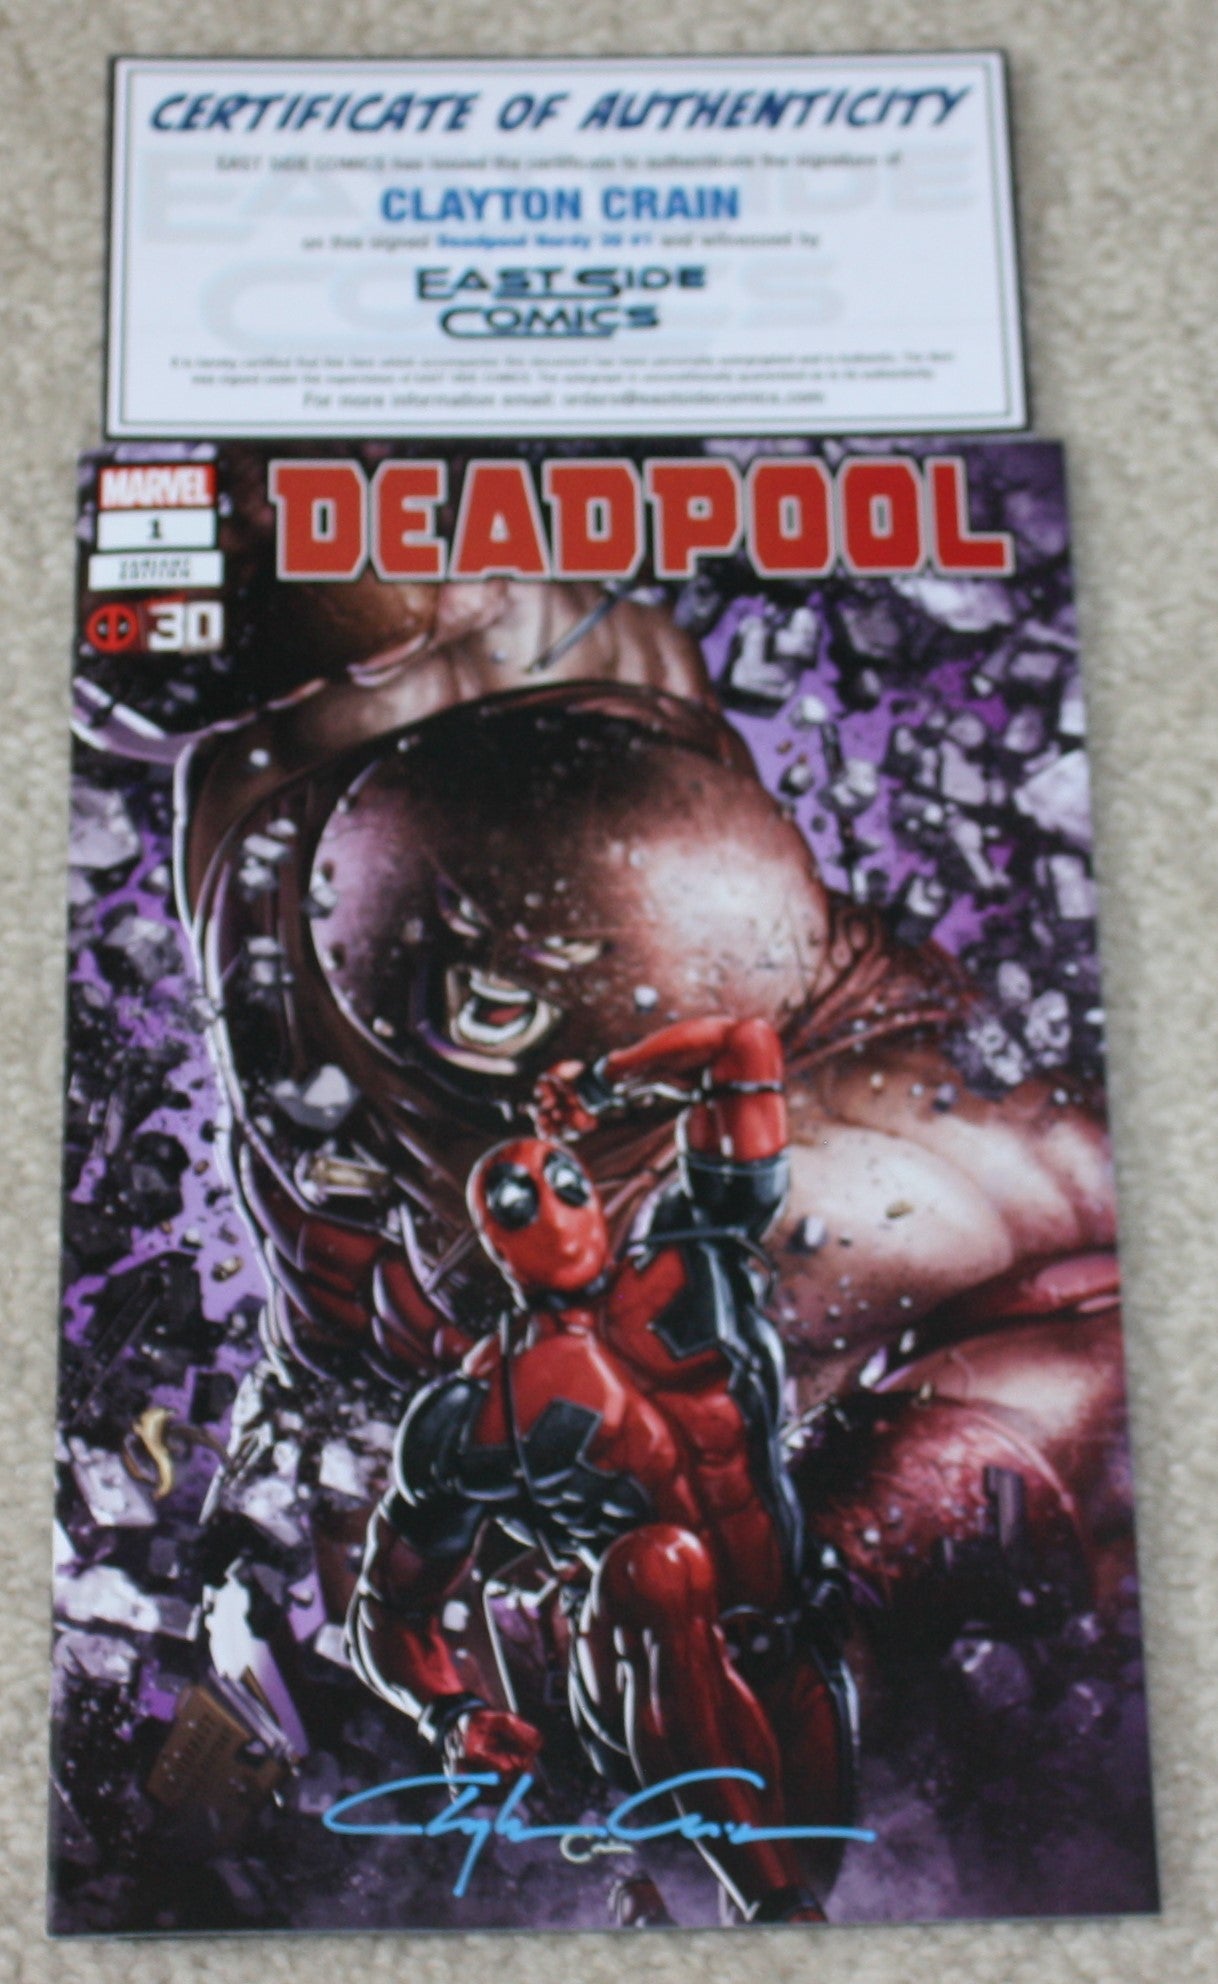 DEADPOOL NERDY 30 #1 CLAYTON CRAIN SOLID INK SIGNED COA TRADE DRESS VARIANT-A